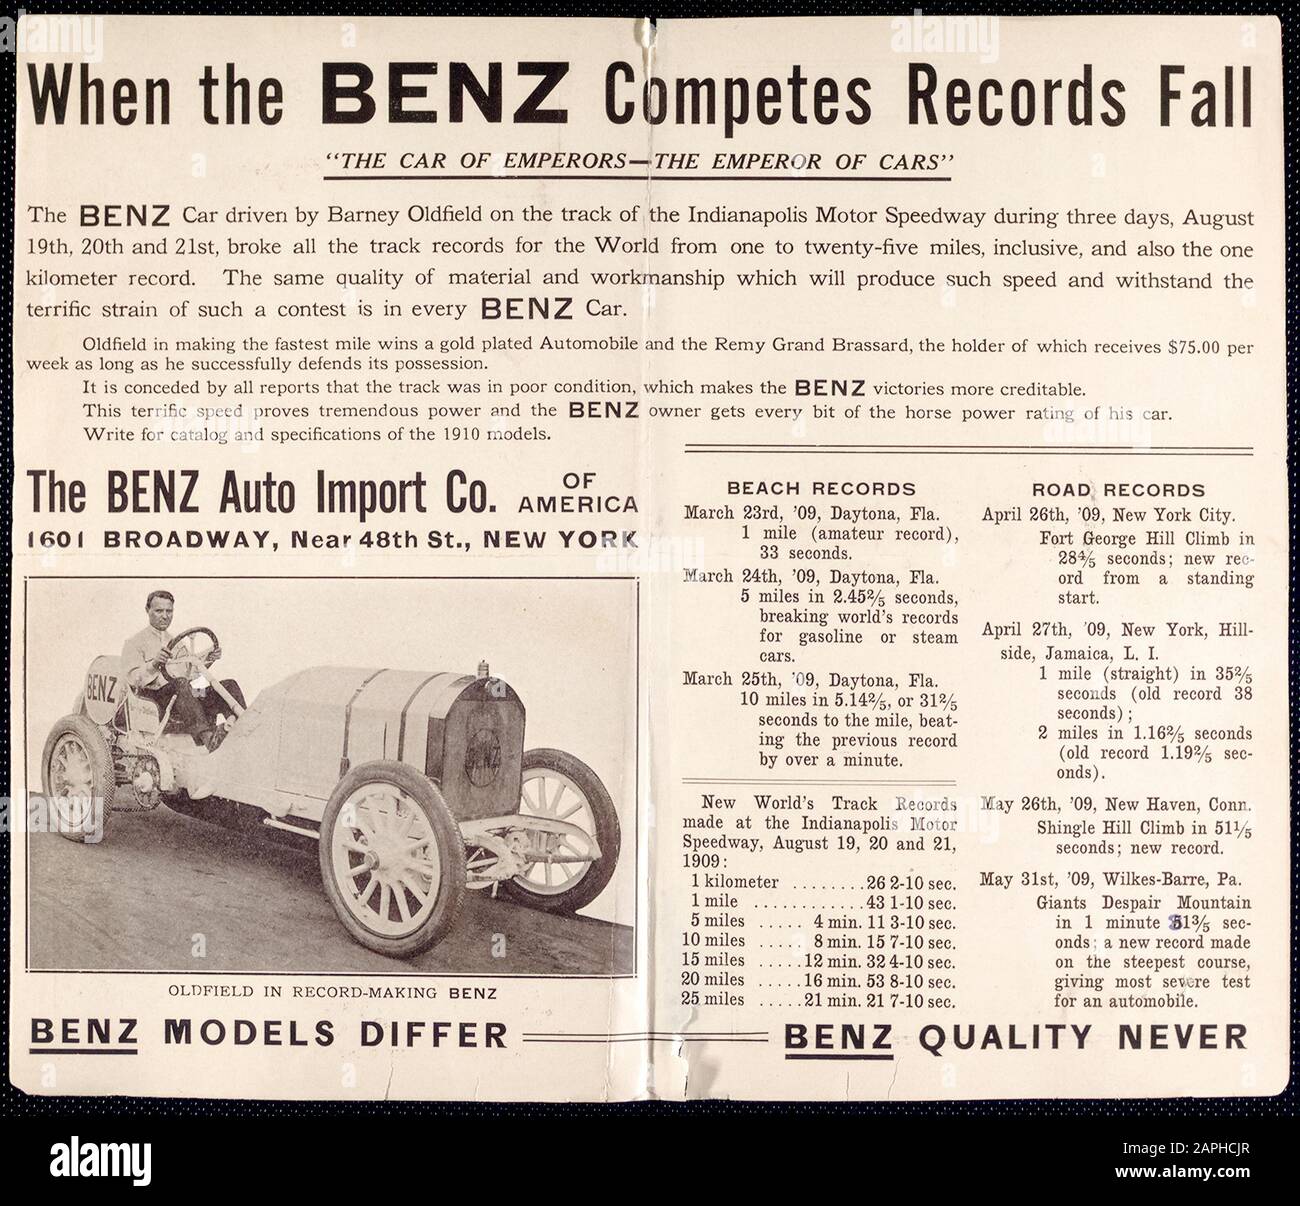 Vintage car, Benz automobile advertisement leaflet, motor car, When the Benz competes records fall, The Benz car driven by Barney Oldfield, Oldfield in record-making Benz, photograph, 1909 Stock Photo